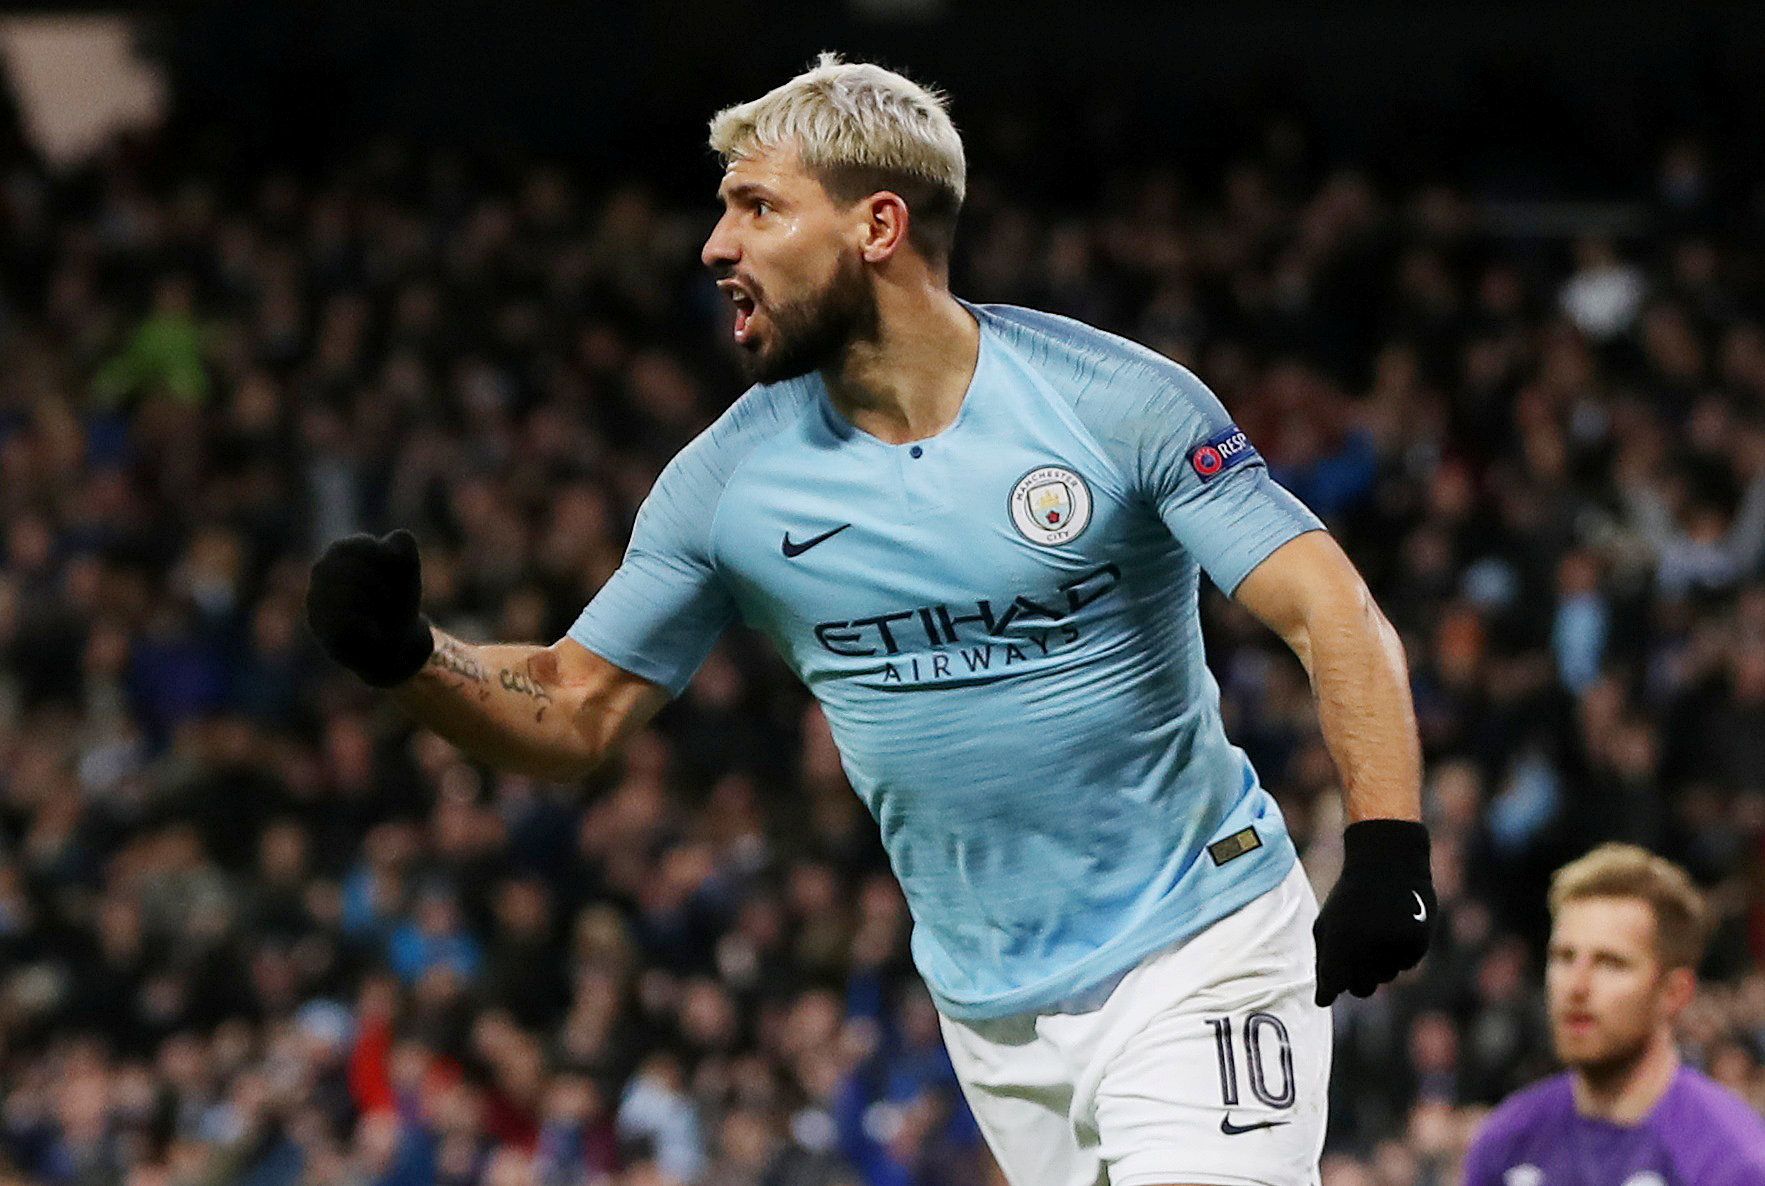 Soccer Football - Round of 16 Second Leg - Manchester City v Schalke 04 - Etihad Stadium, Manchester, Britain - March 12, 2019  Manchester City's Sergio Aguero celebrates scoring their second goal           Action Images via Reuters/Lee Smith